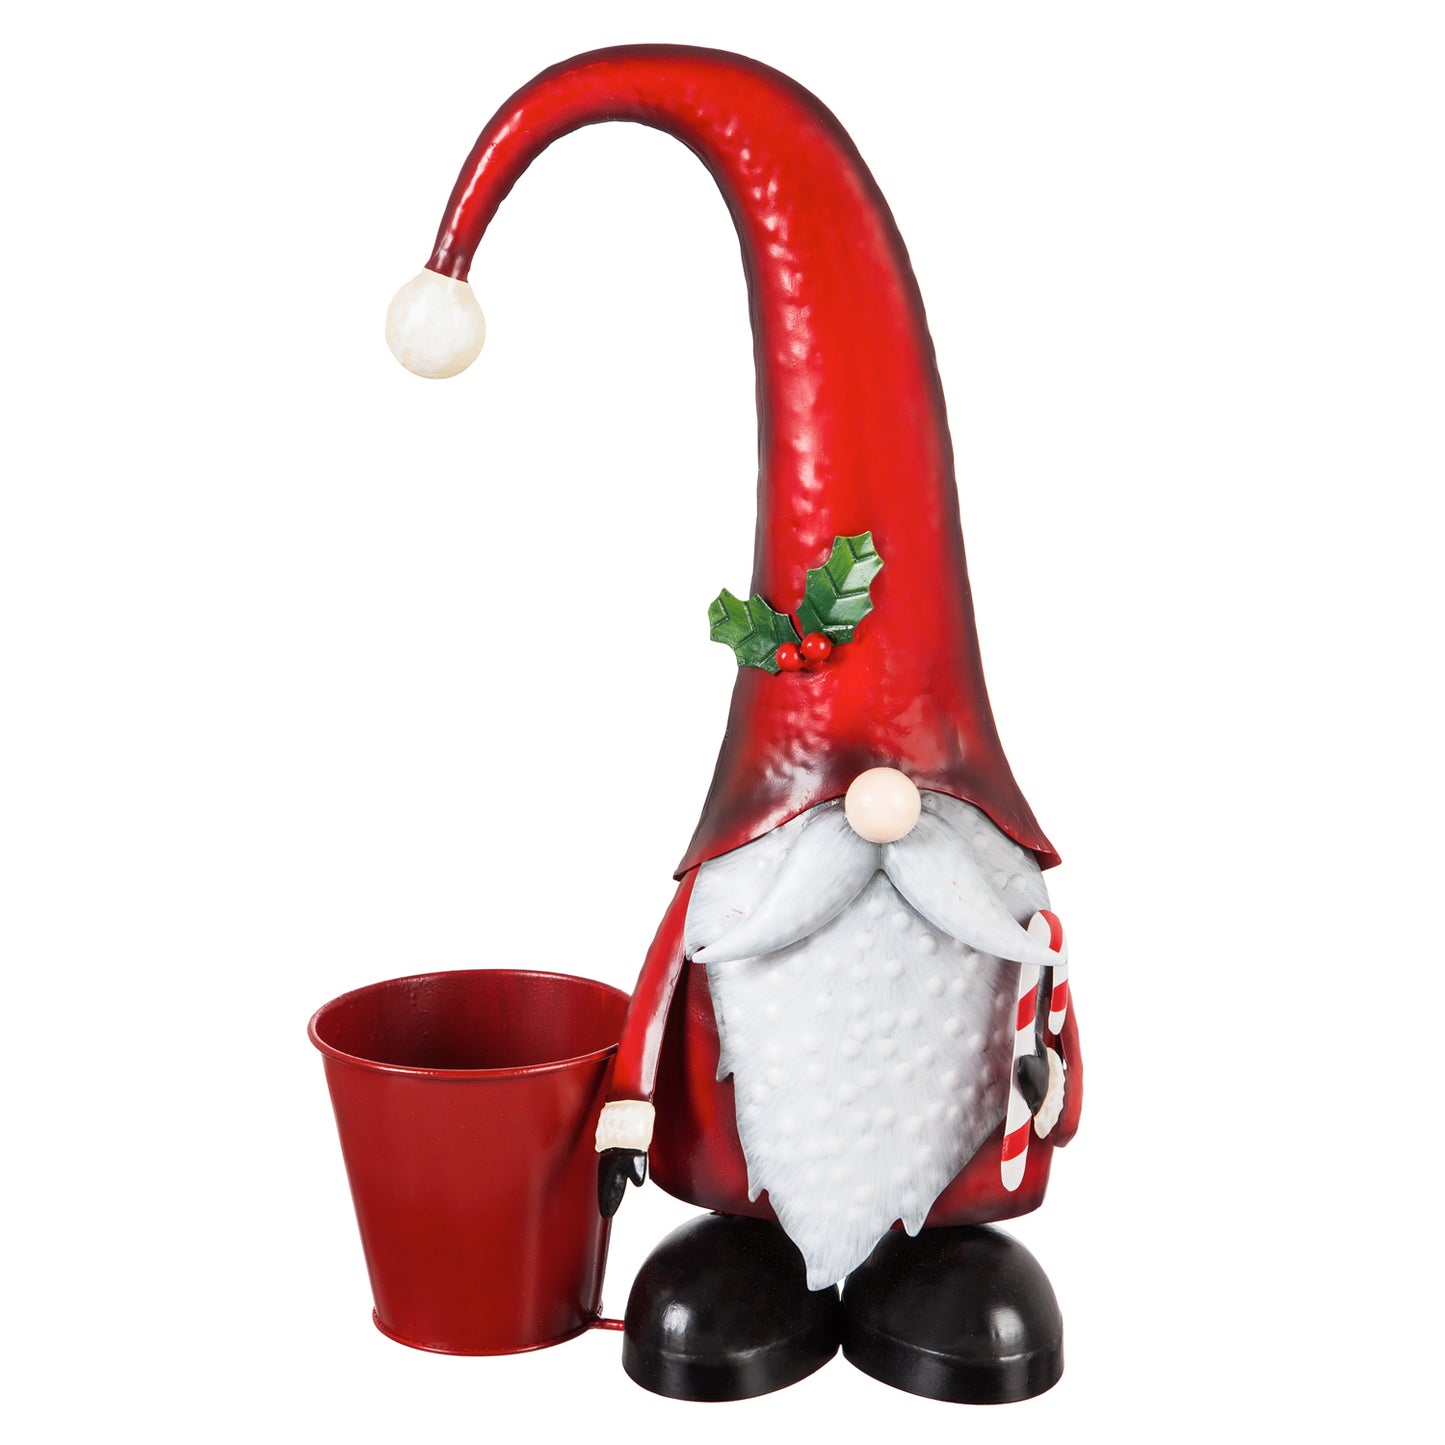 17.75"H Metal Winter Gnome with Planter